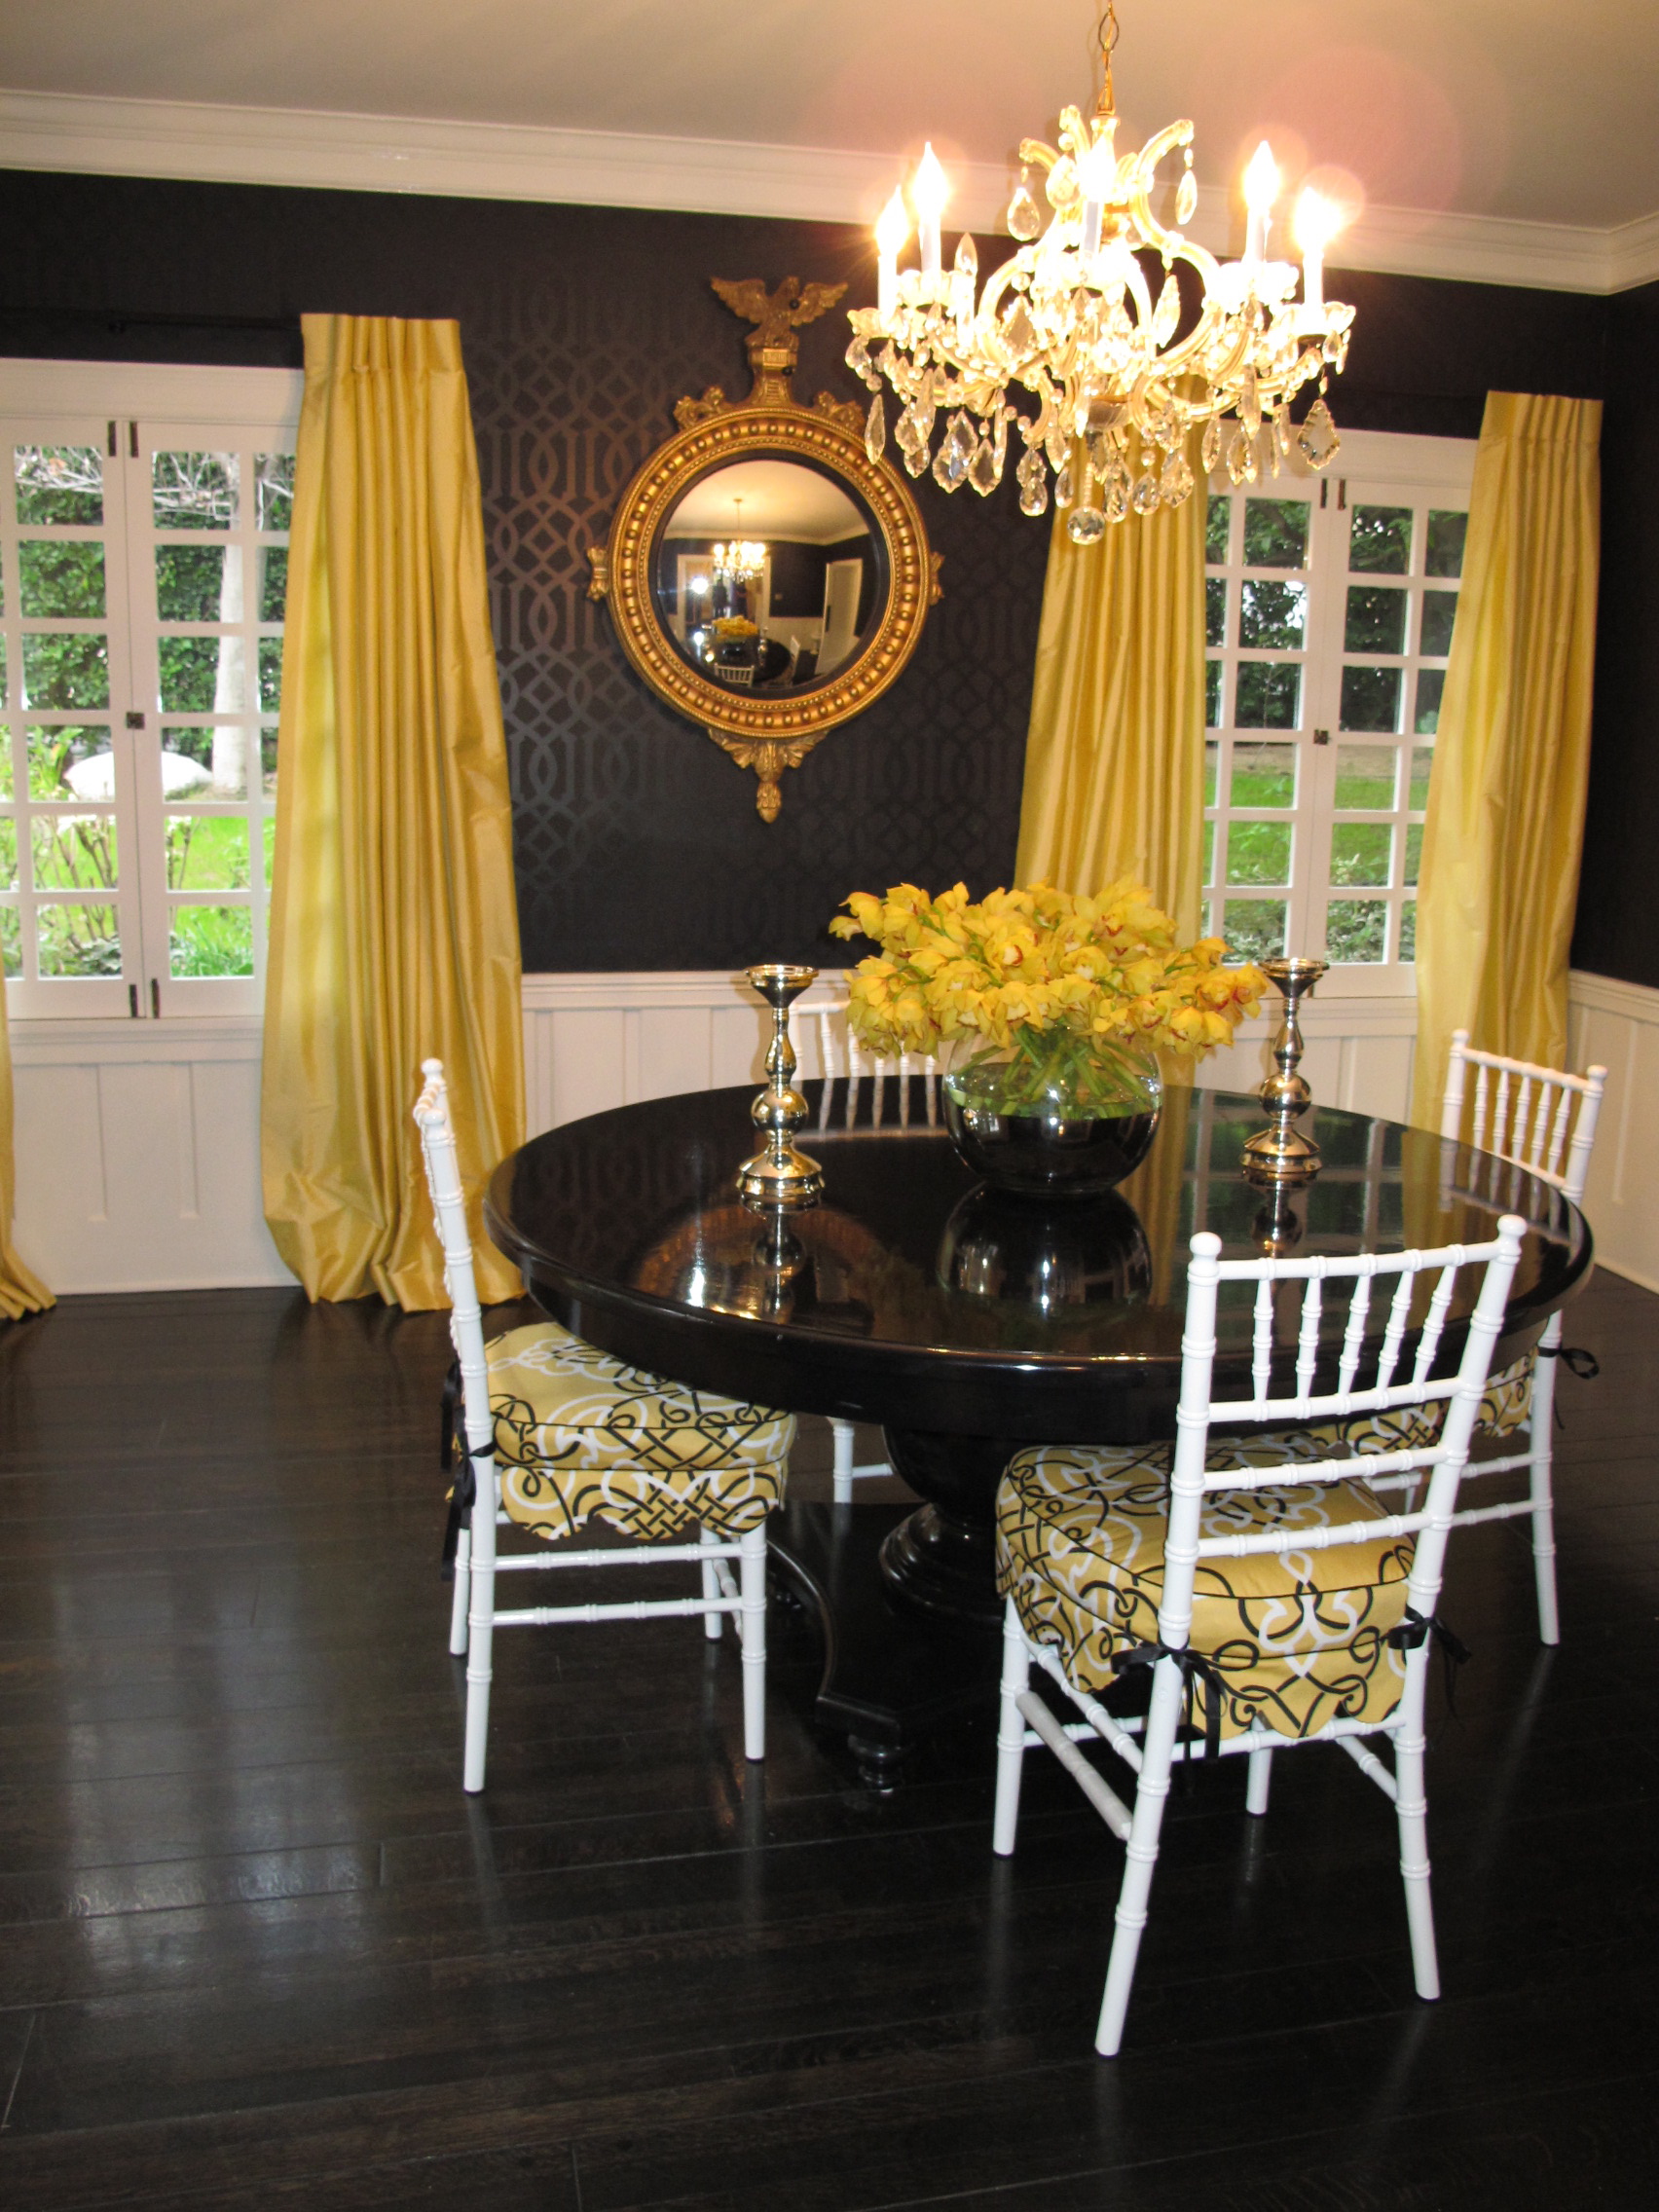 The Most Incredible and Interesting black and yellow dining room for
your Reference